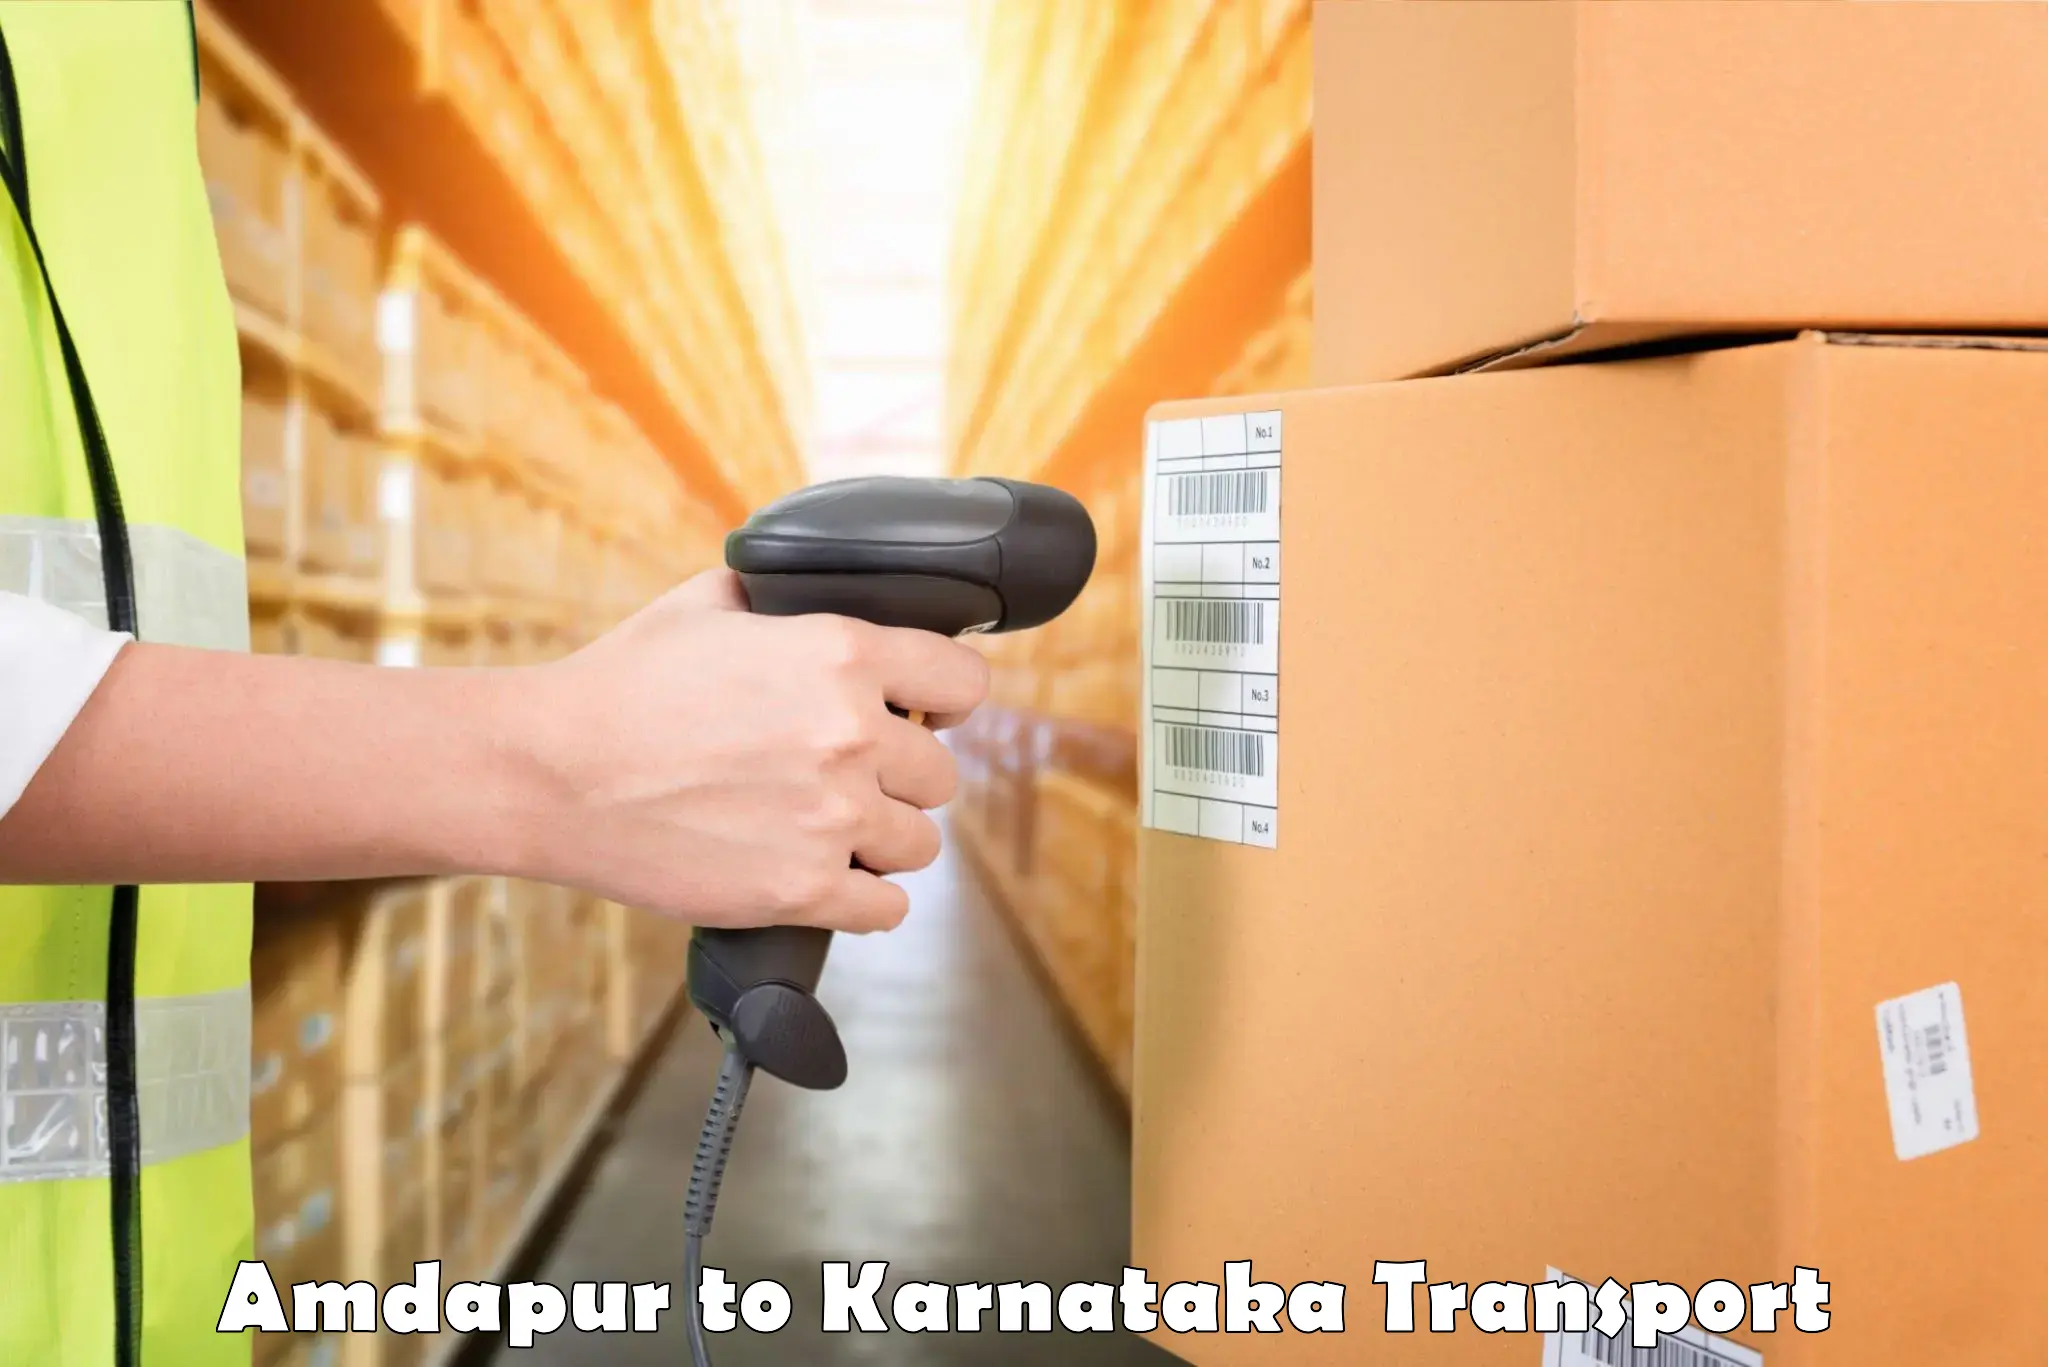 Daily transport service Amdapur to Bagalkot